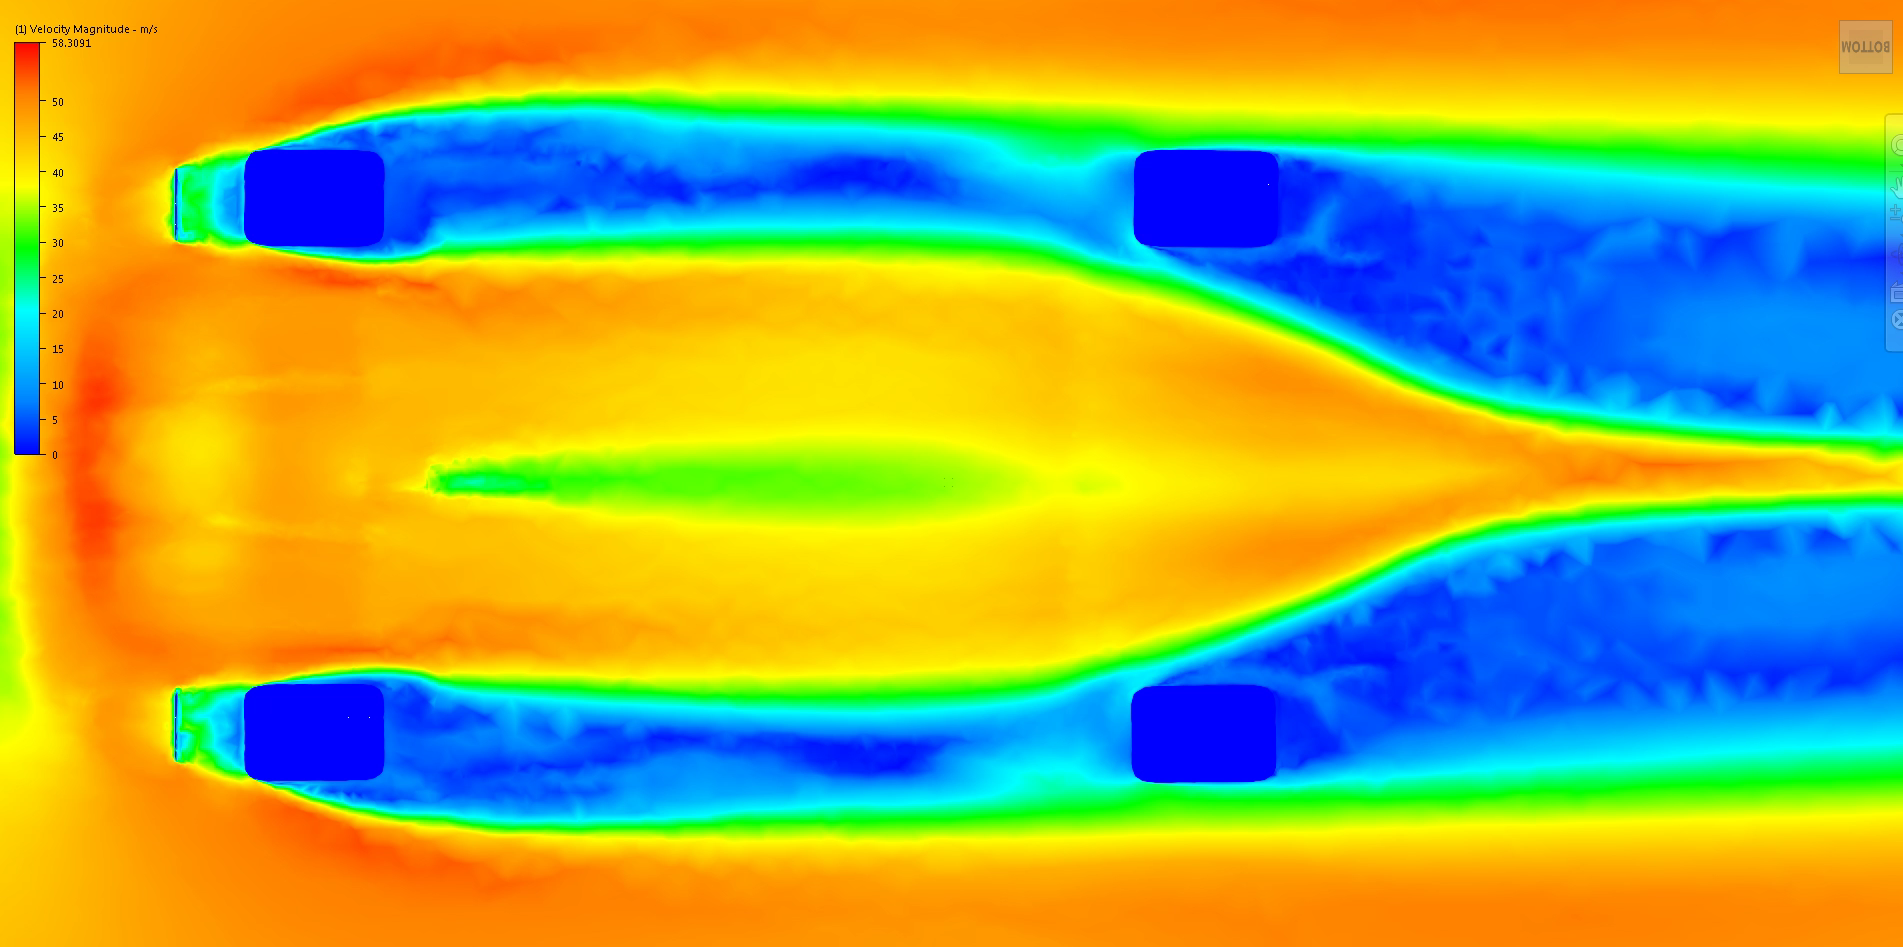 Phase 10 Underbody Velocity Contours.png